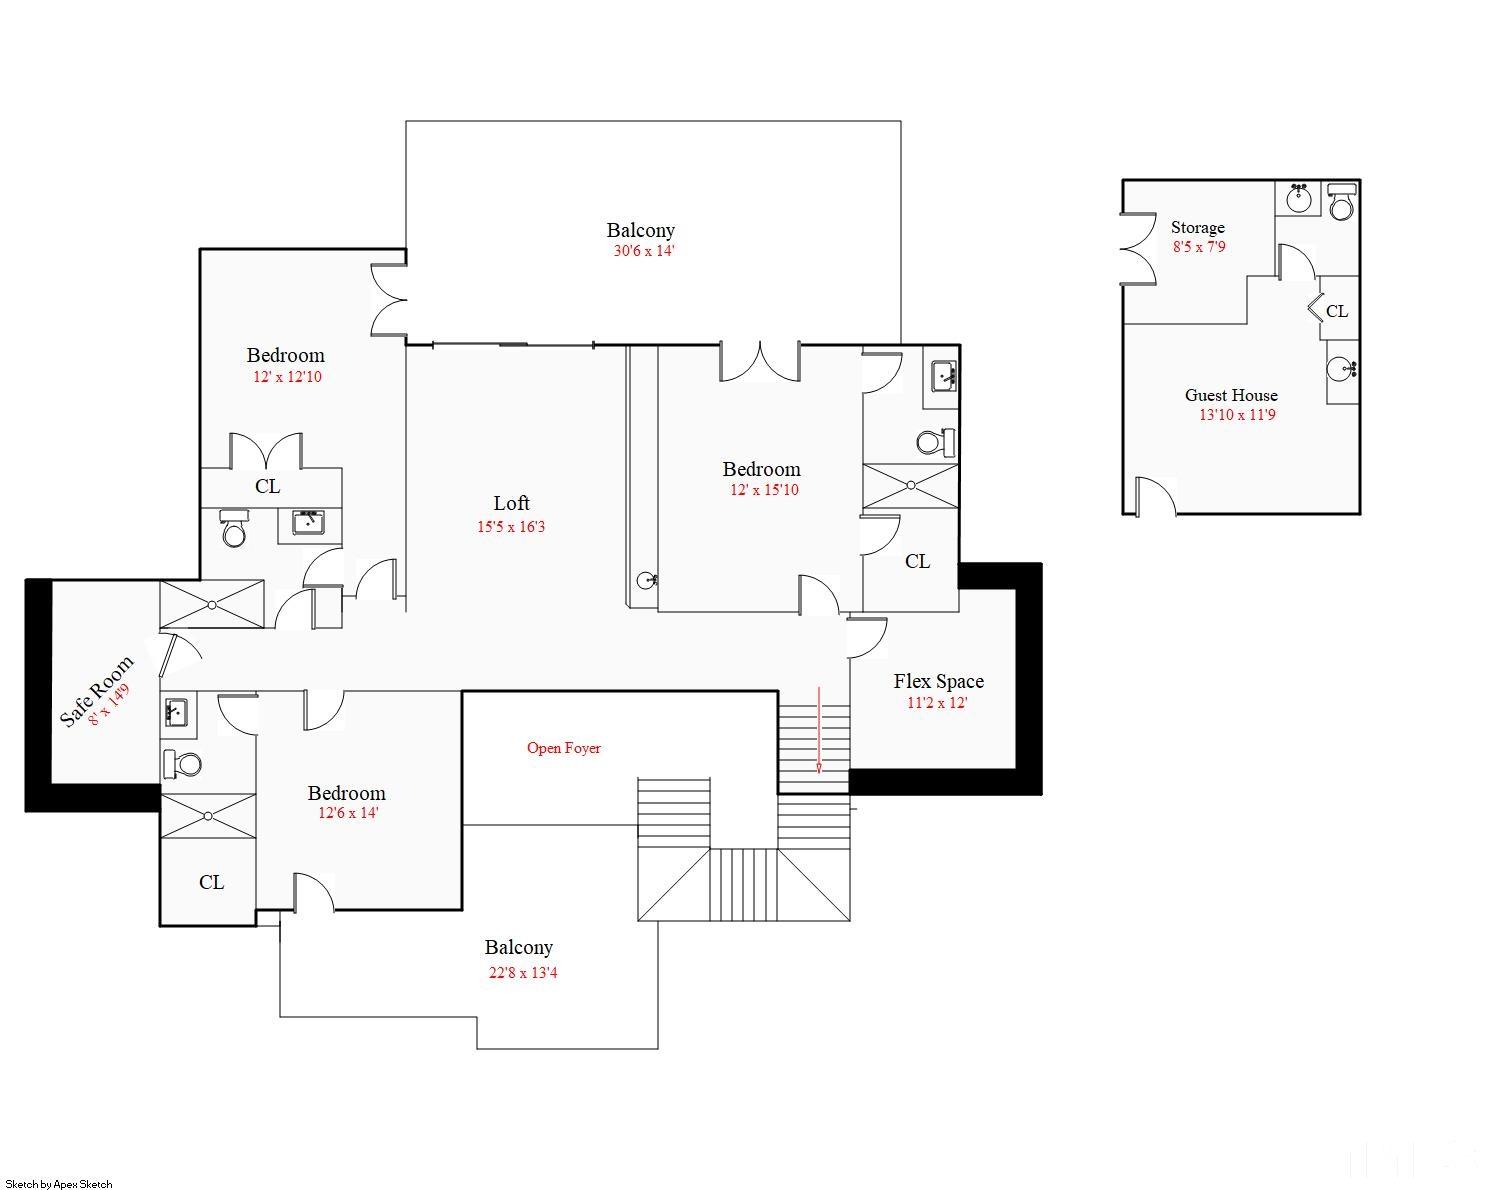 Second Floor Plan & Detached Guest/Office and Storage Space Plan